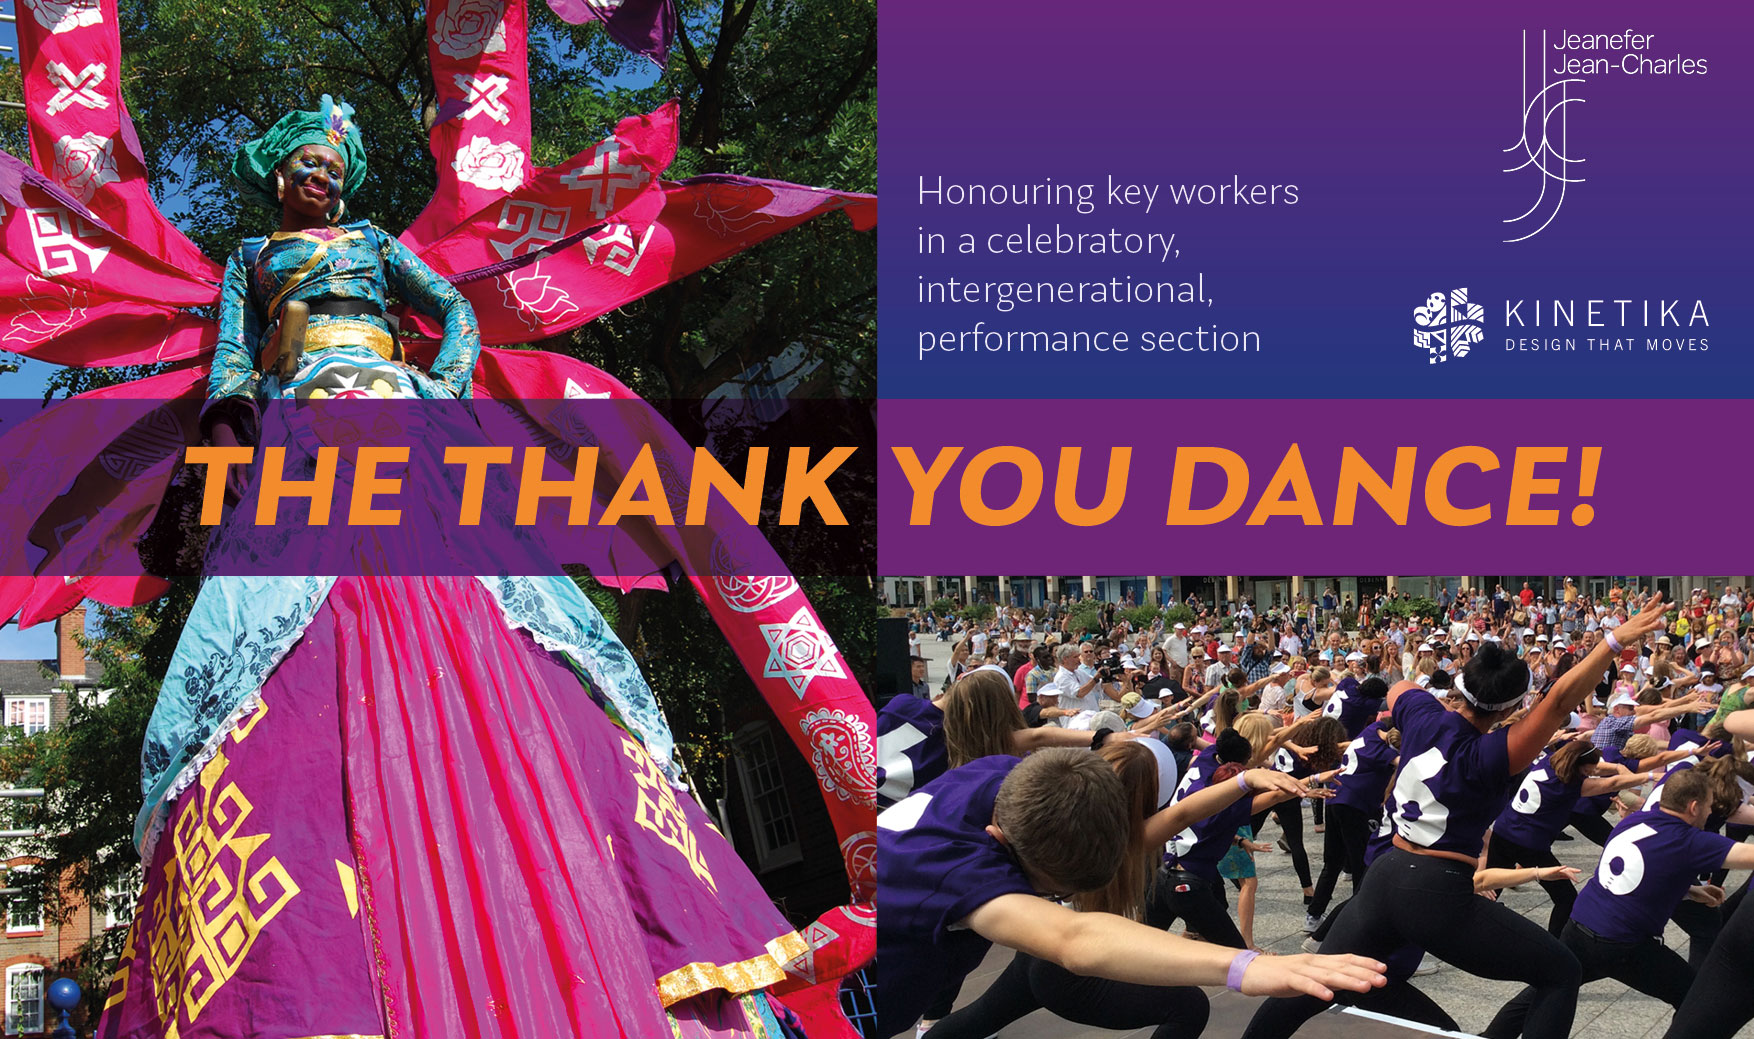 Composite image about the Thank you dance, showing a tall pink carnival costume and a group of dancers in purple t-shirts